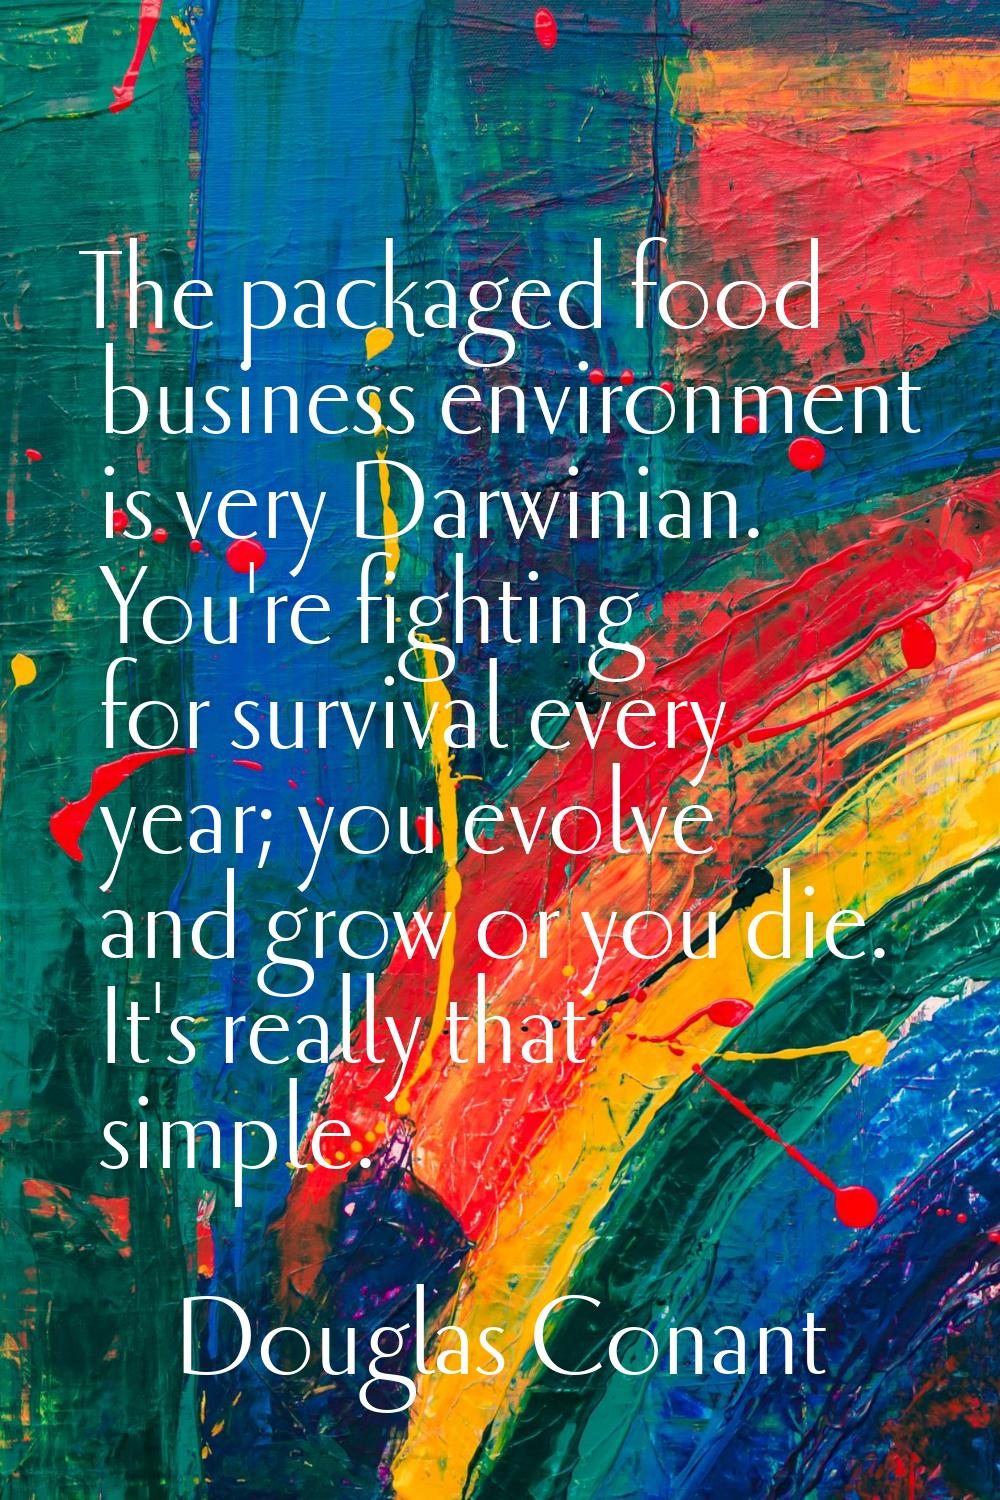 The packaged food business environment is very Darwinian. You're fighting for survival every year; 